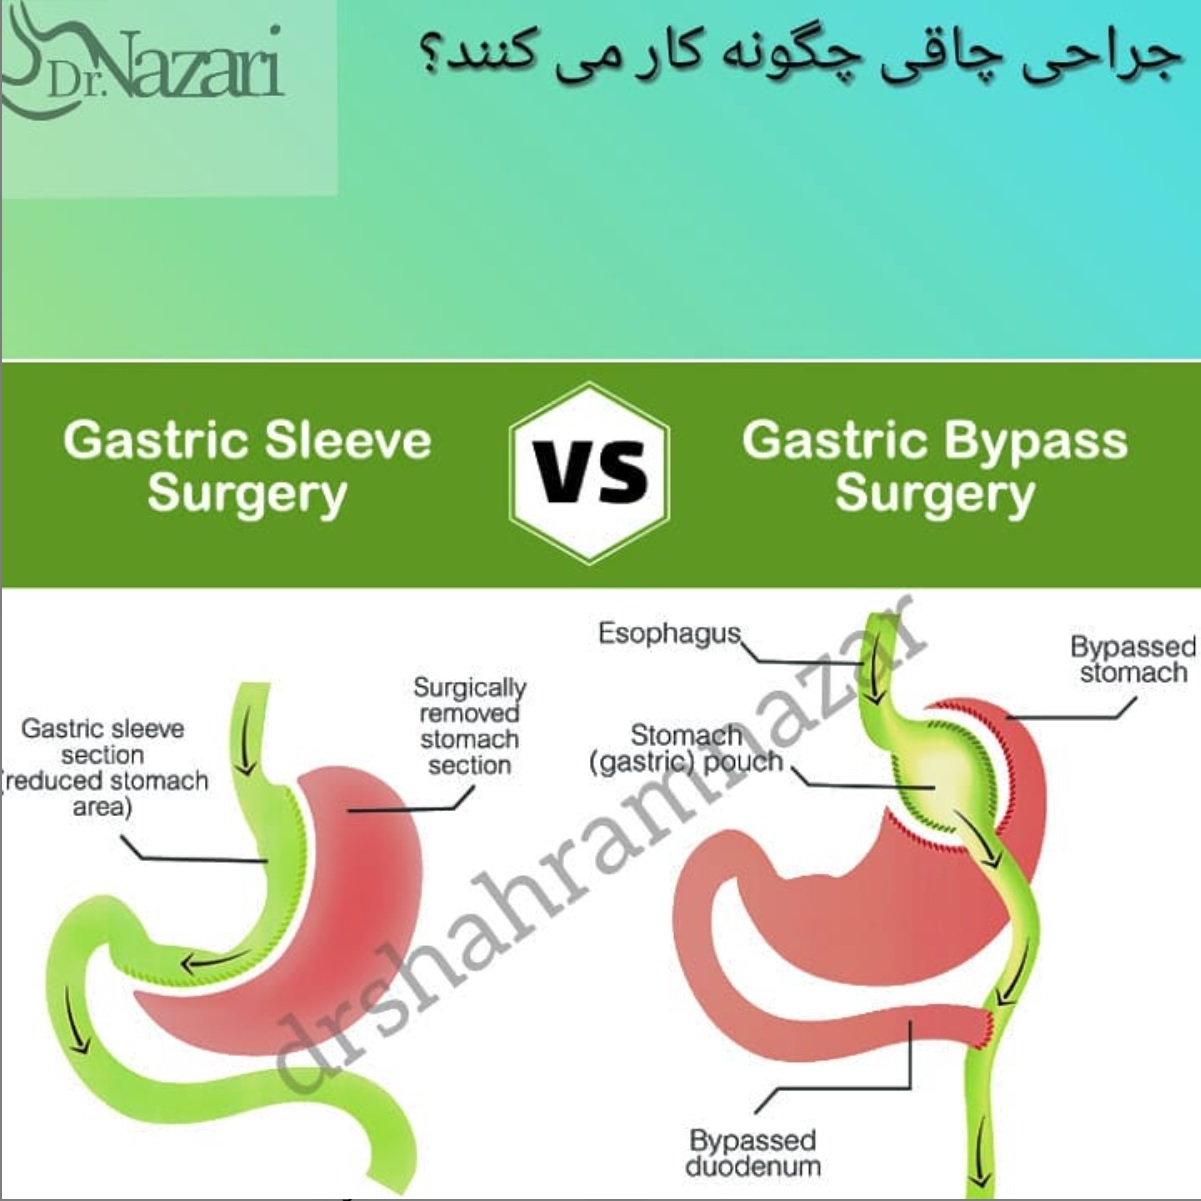 Bypass surgery new bowel direction